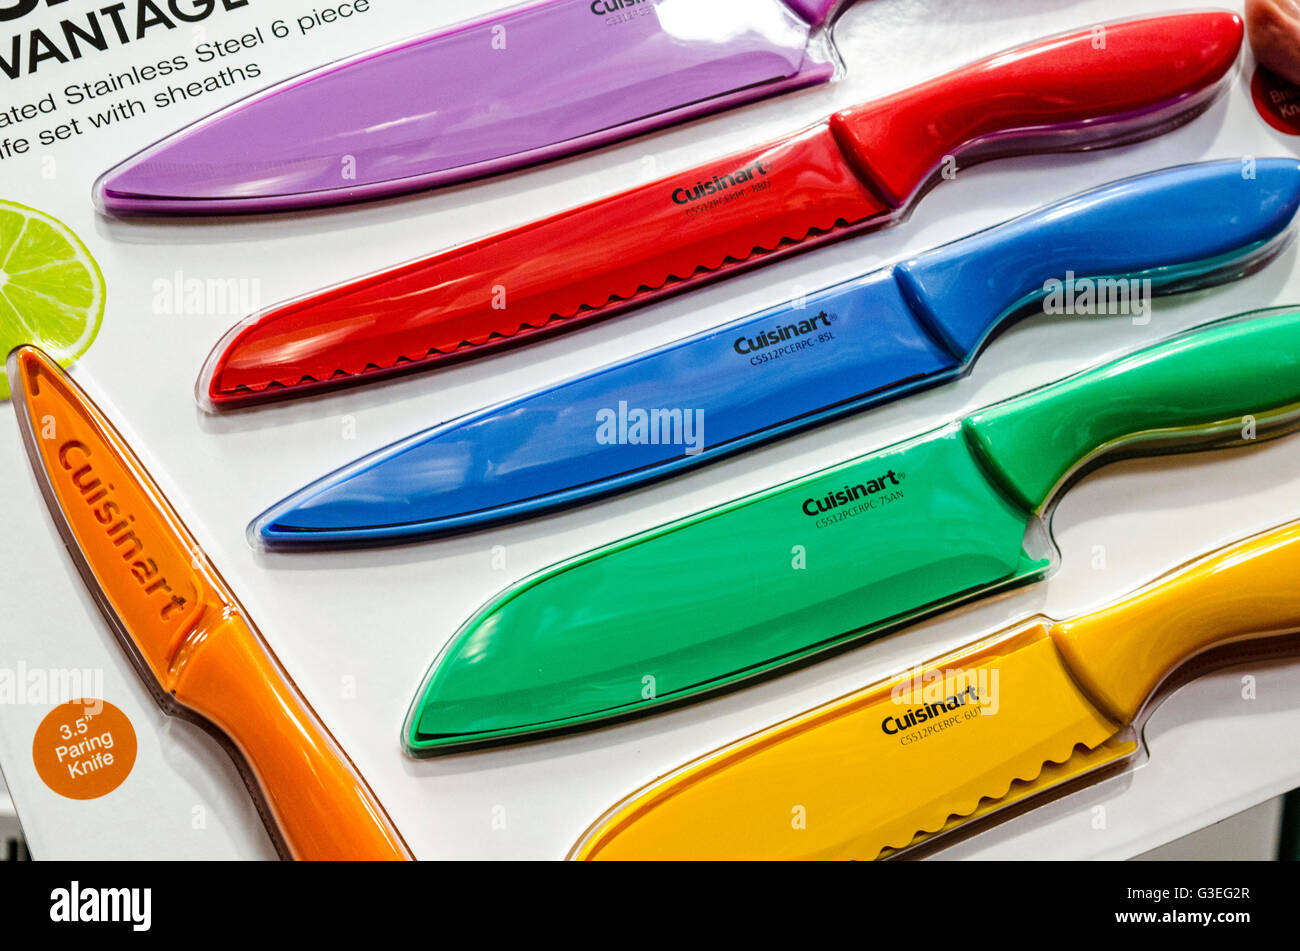 Cuisinart brightly colored knives at a Costco Store in San Leandro